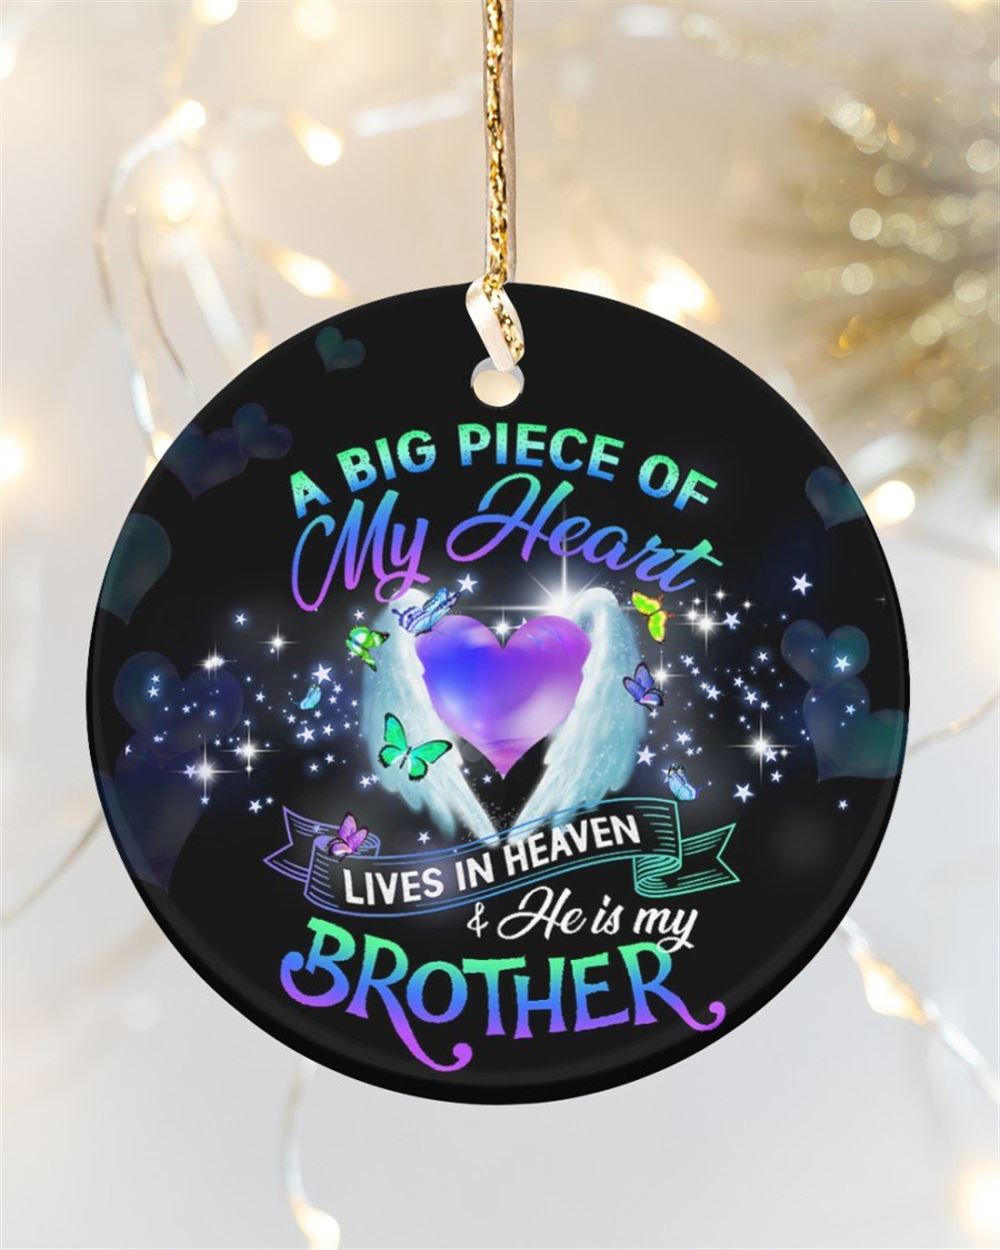 A Big Piece Of My Heart Lives In Heaven Circle Ornament 2 Sided Christmas Gift To Brother In Heaven